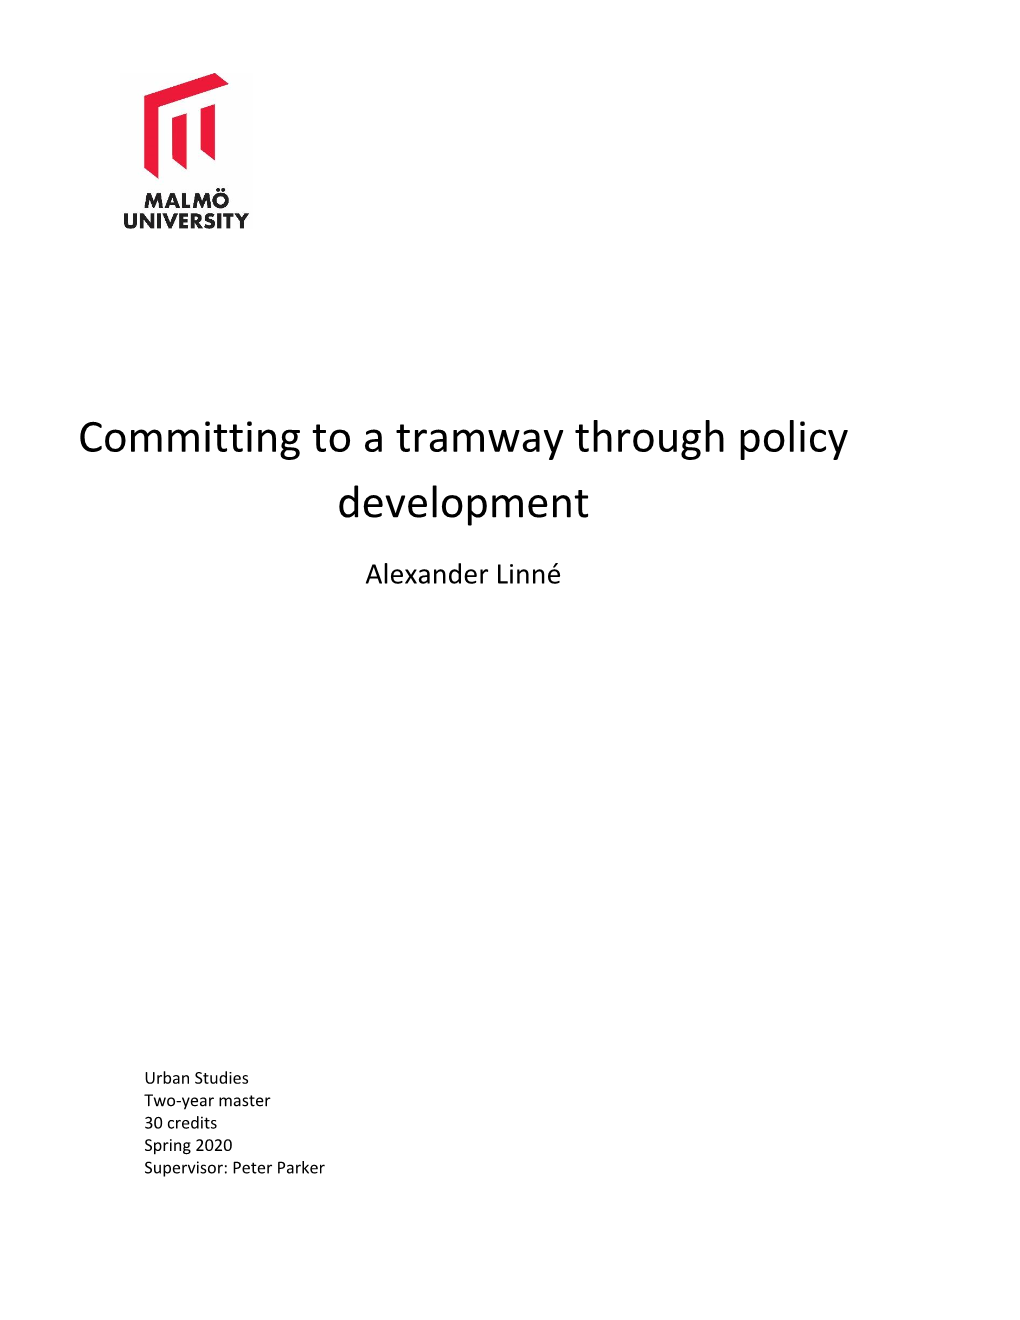 Committing to a Tramway Through Policy Development